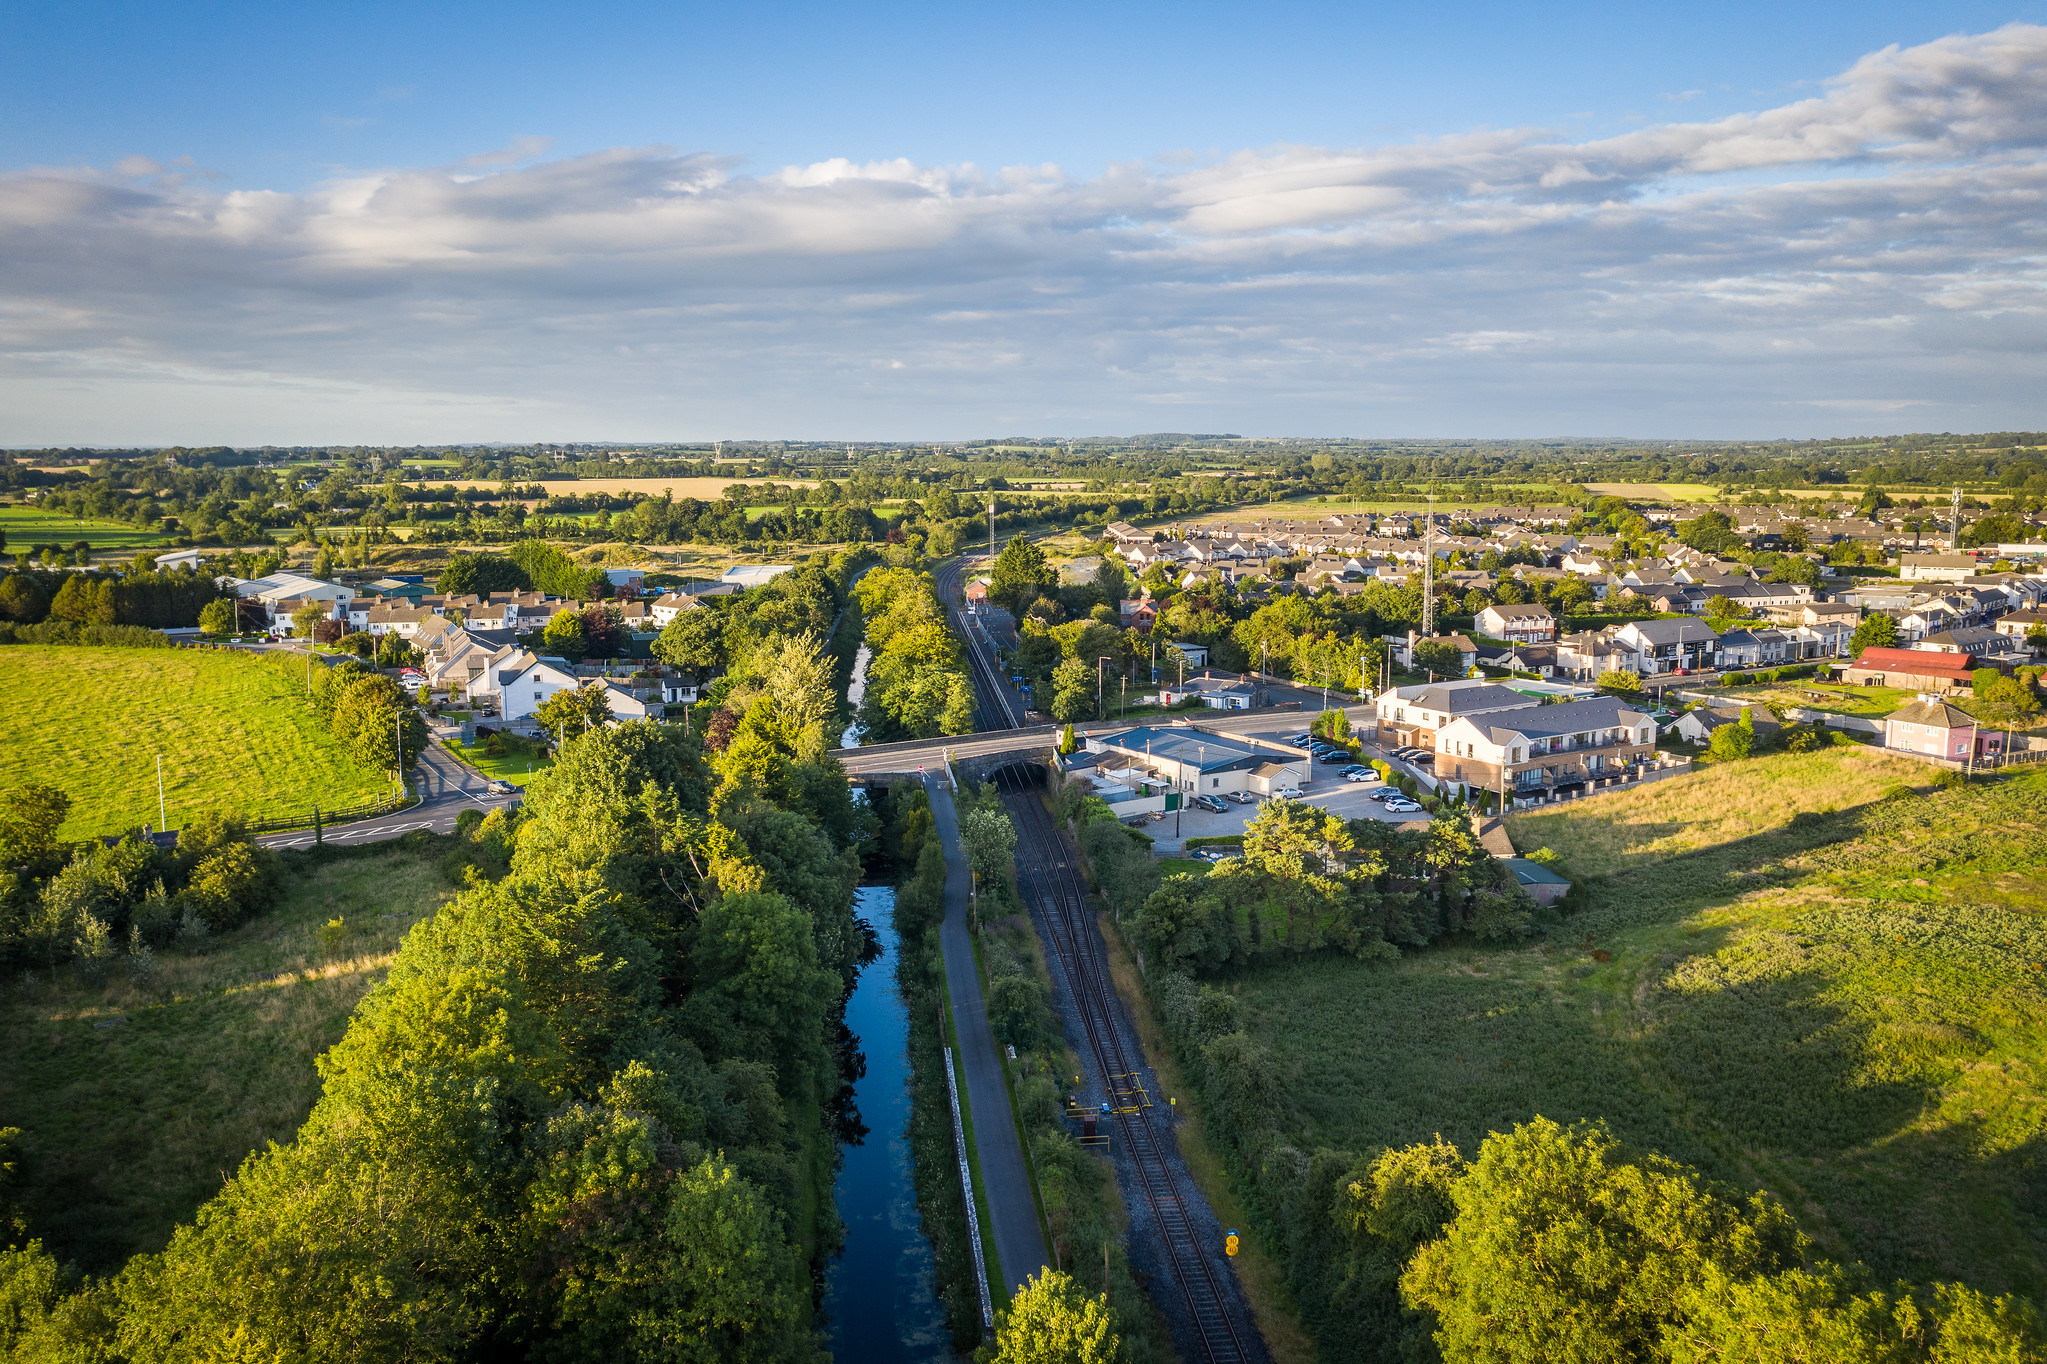 Enfield from the air with the Royal Canal Greenway, canal and train tracks visible